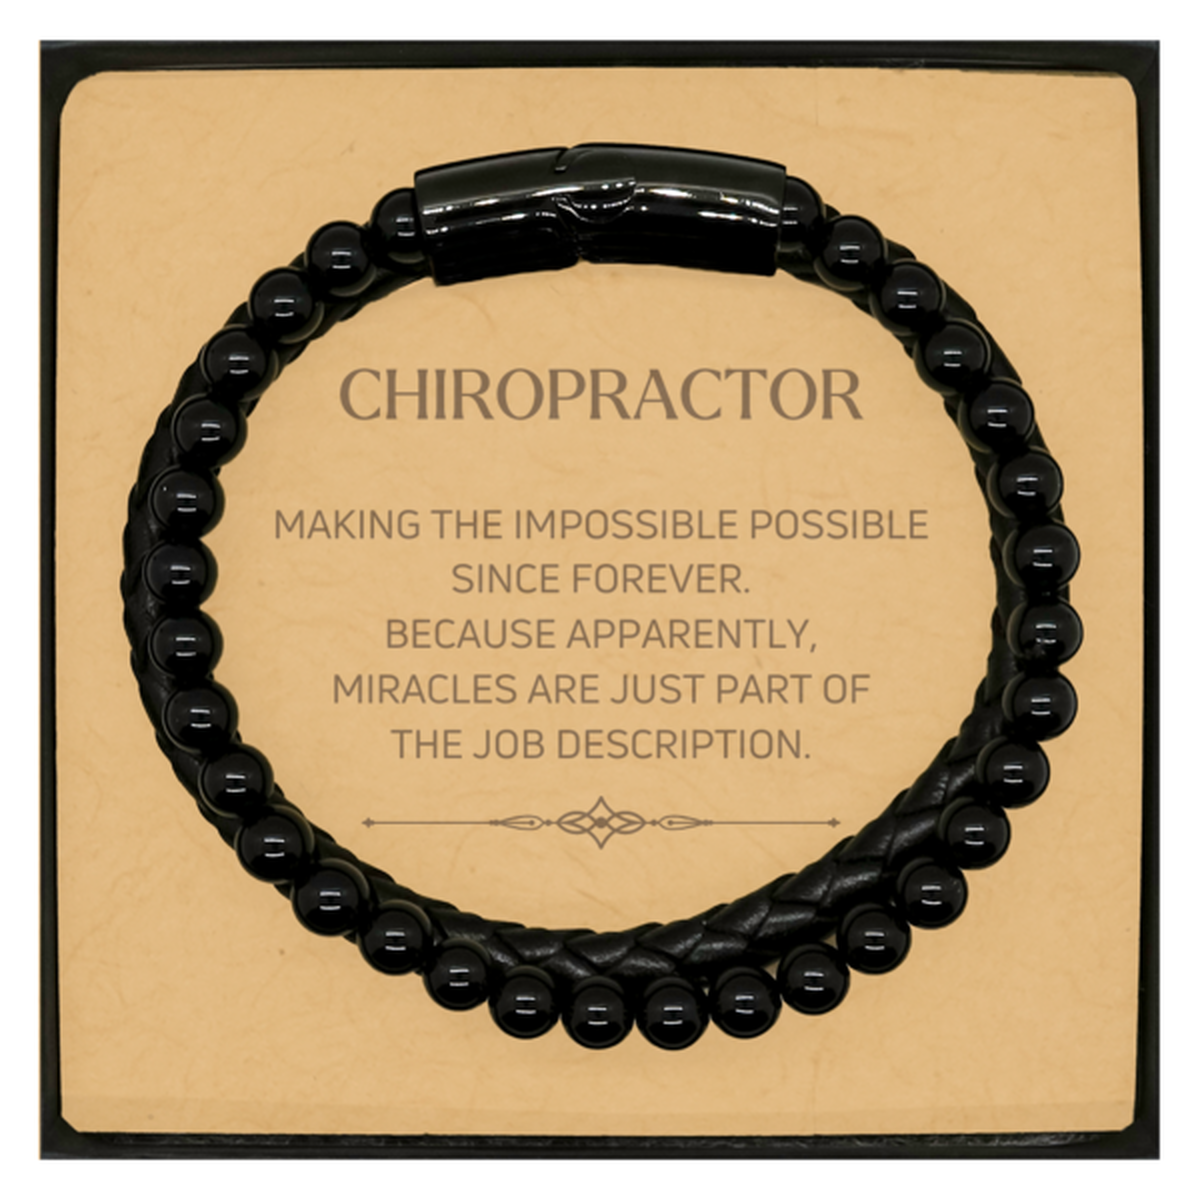 Funny Chiropractor Gifts, Miracles are just part of the job description, Inspirational Birthday Christmas Stone Leather Bracelets For Chiropractor, Men, Women, Coworkers, Friends, Boss